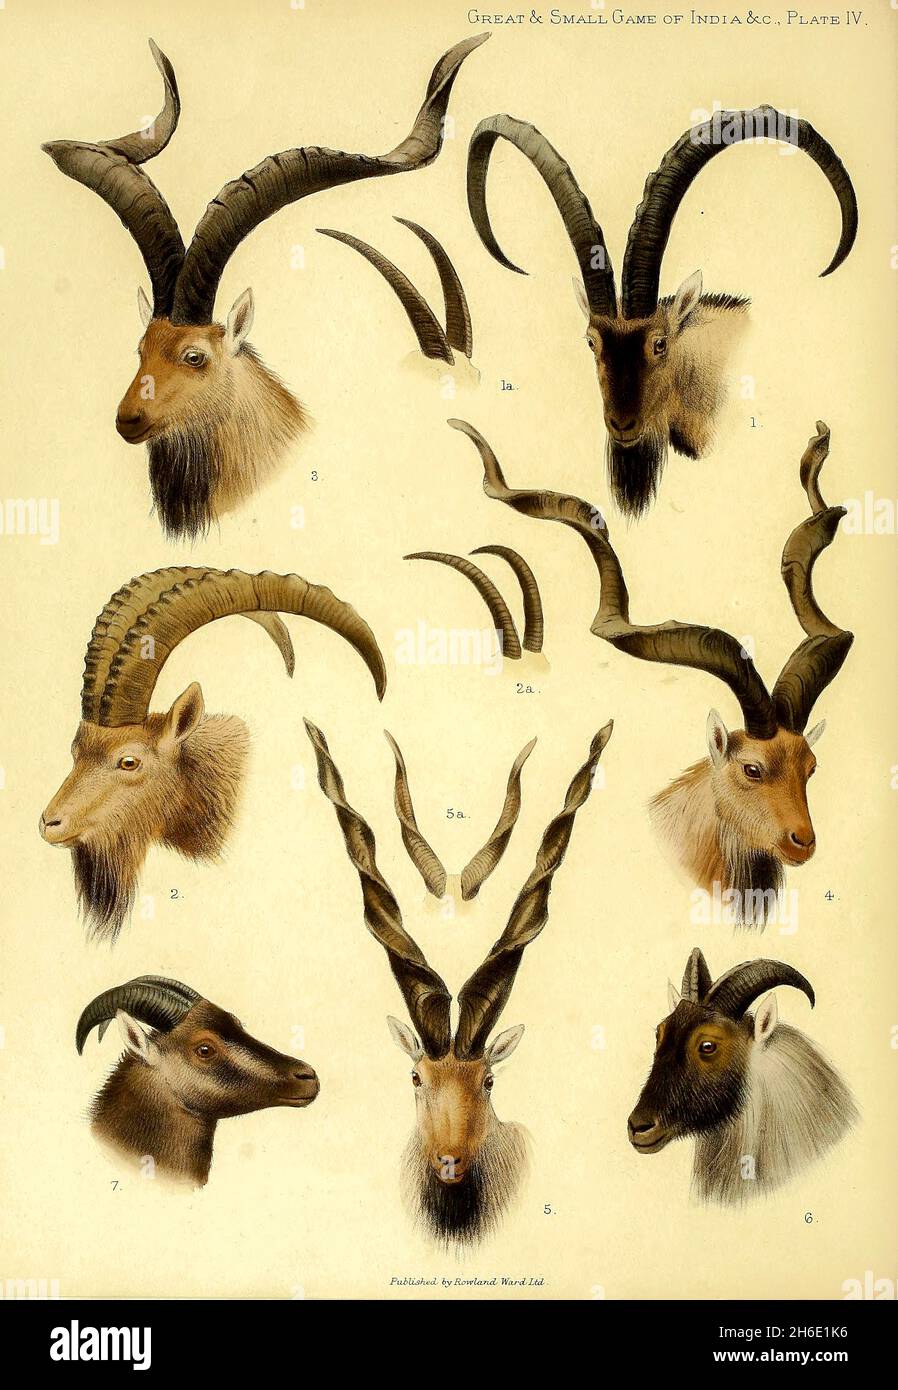 PLATE 4 1, Sind Wild Goat. 2, Himalayan Ibex. 3, Astor Markhor. 4, Pir  Panjal Markhor. 5, Suleman Markhor. 6, Himalayan Tahr. 7, Nilgiri Tahr.  from the book ' The great and